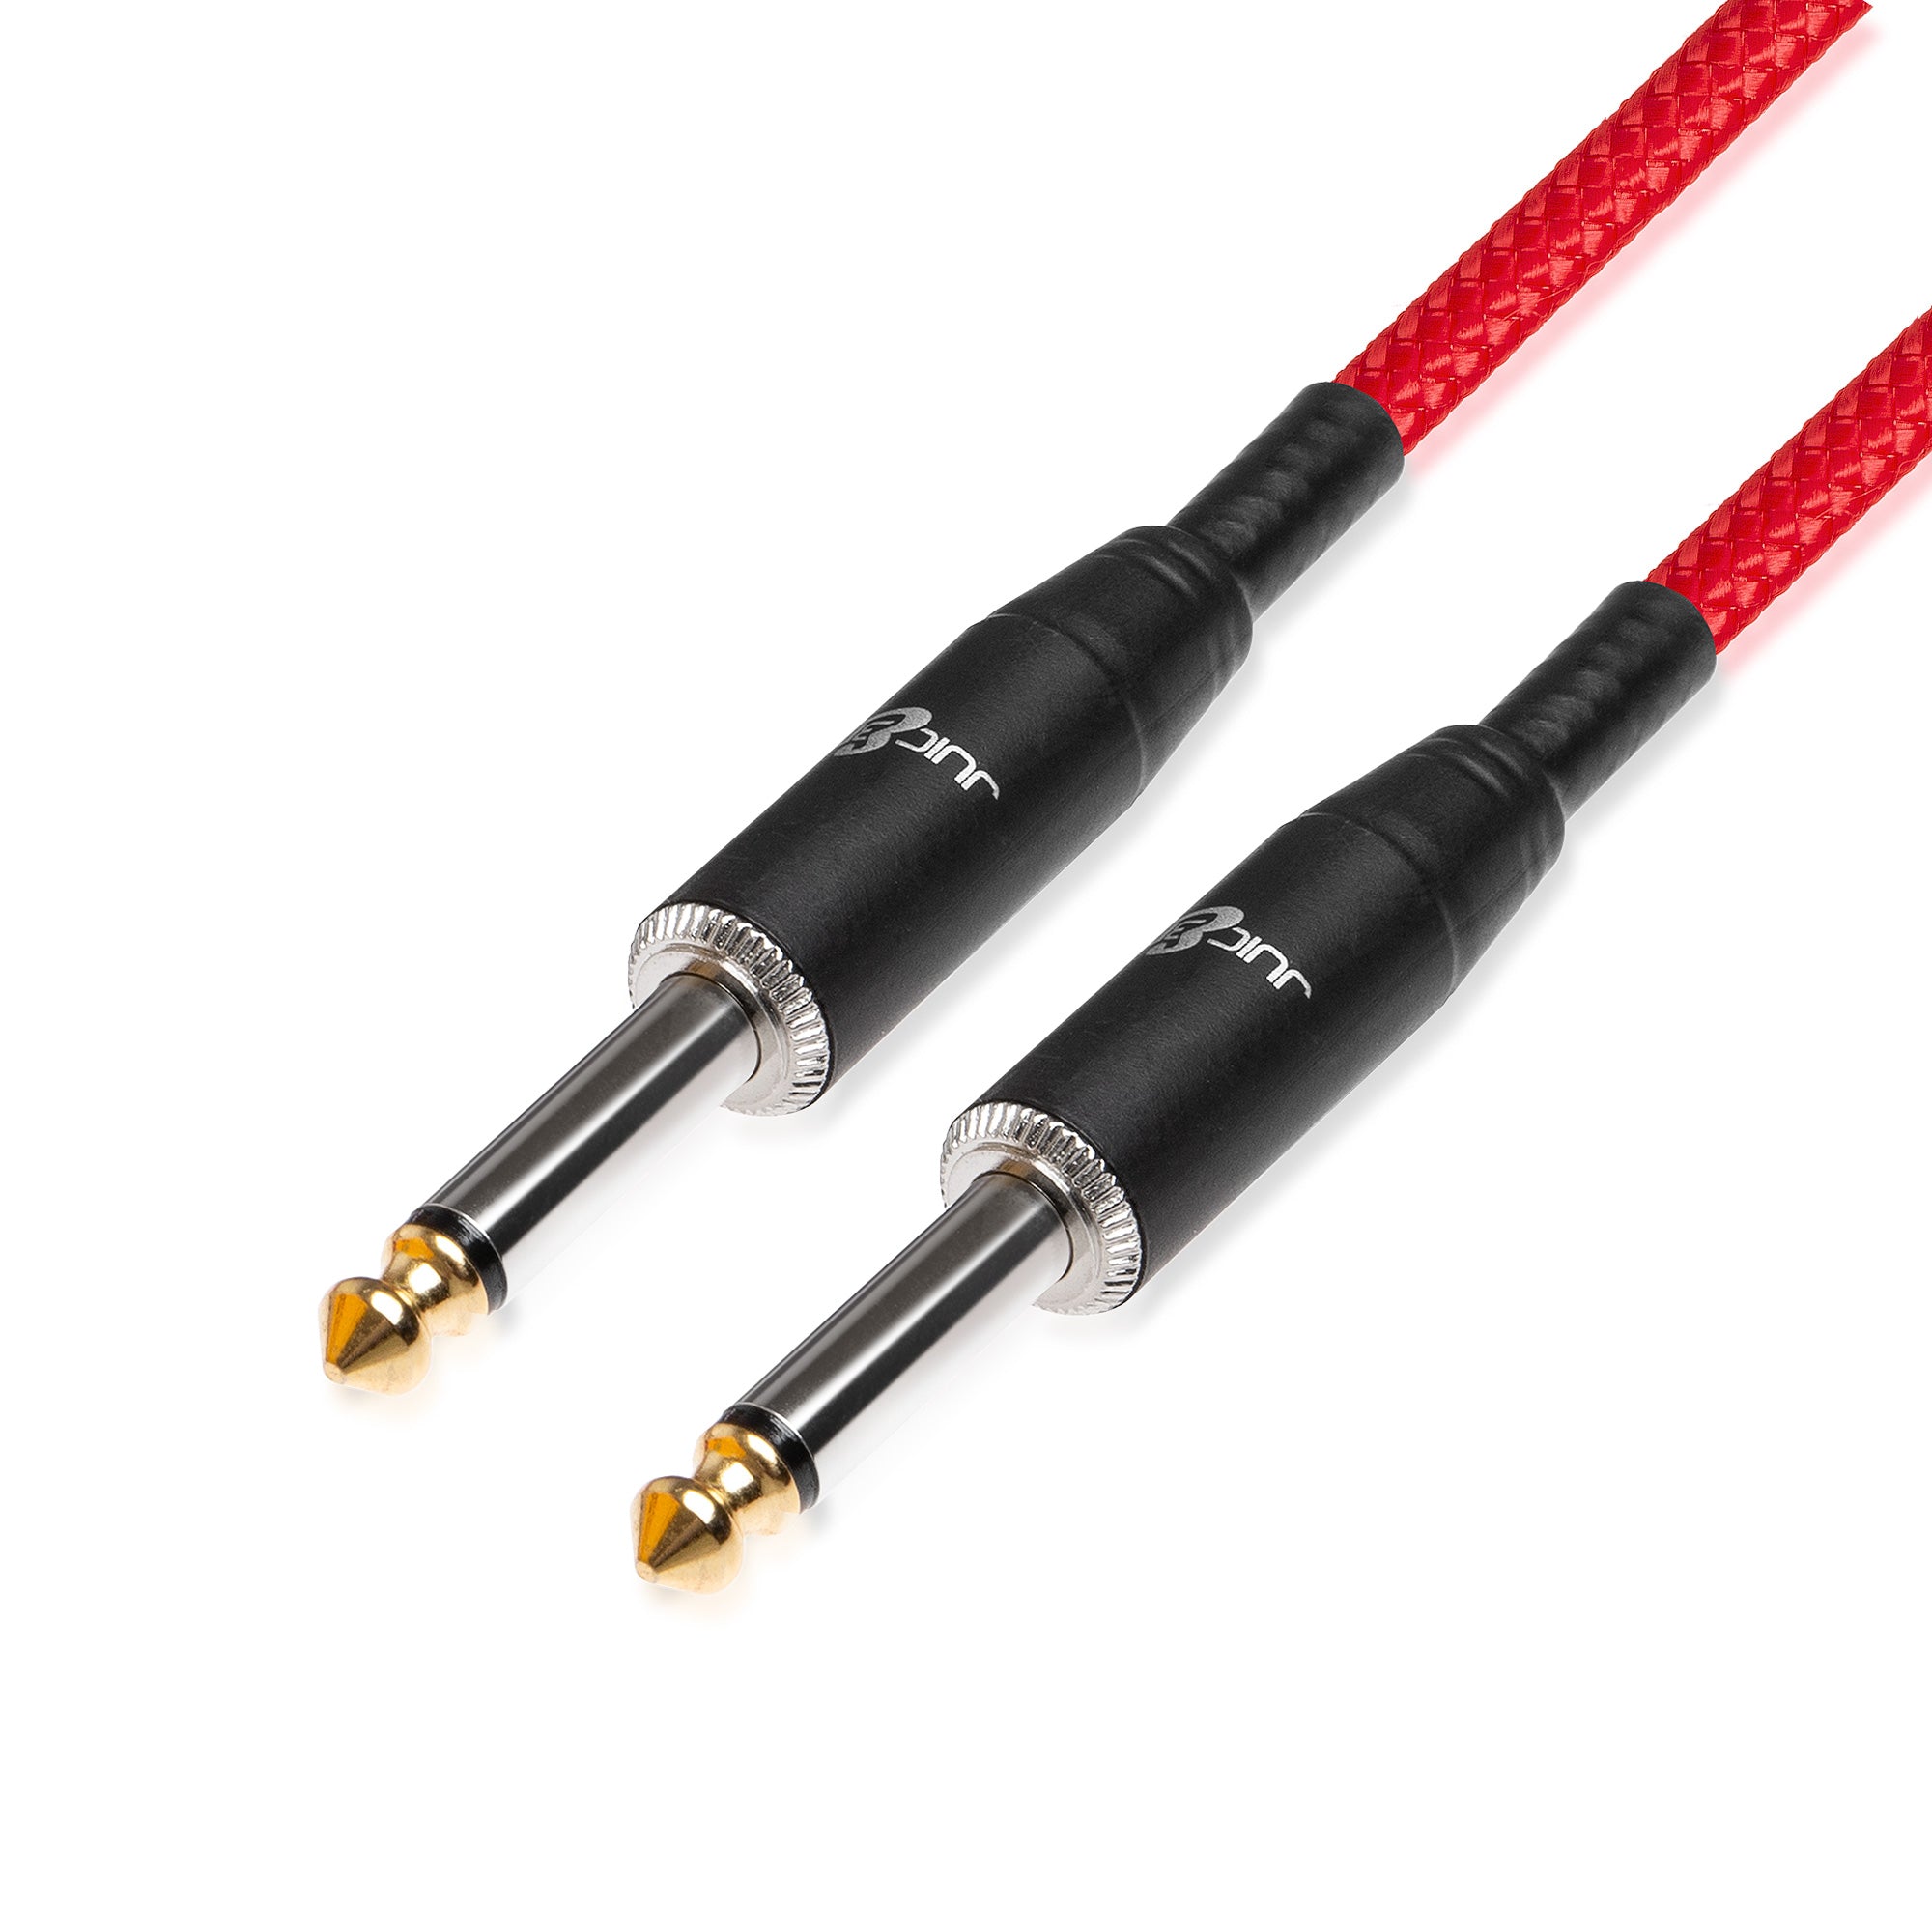 PRO Series Braided Guitar Cable 1/4" Straight Jack to Jack 6.35mm Lead - Red